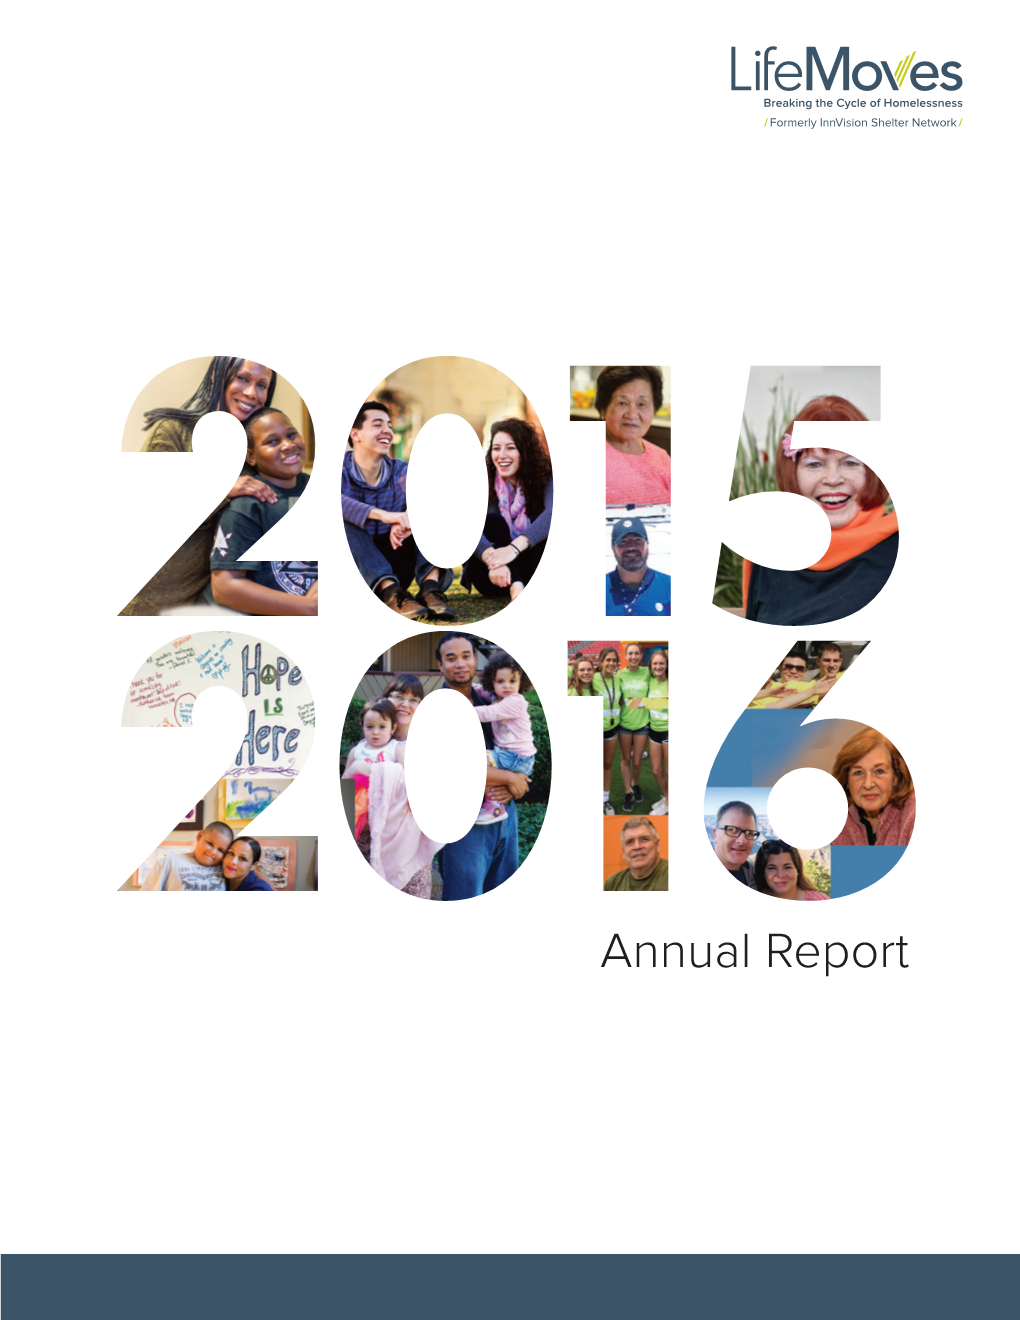 Annual Report from Our CEO